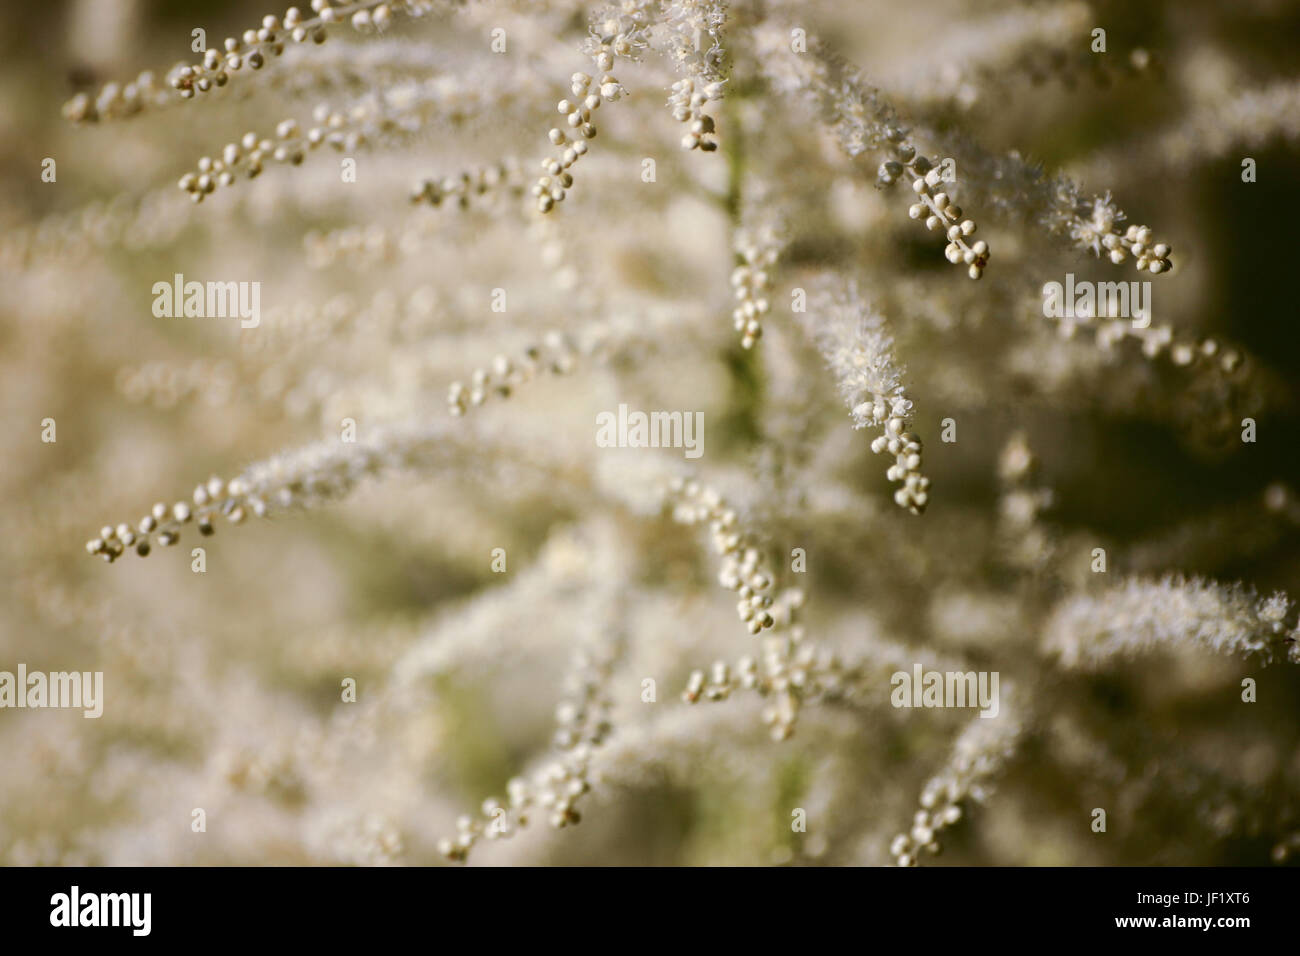 A beautiful close-up of white astilbe flowers Stock Photo